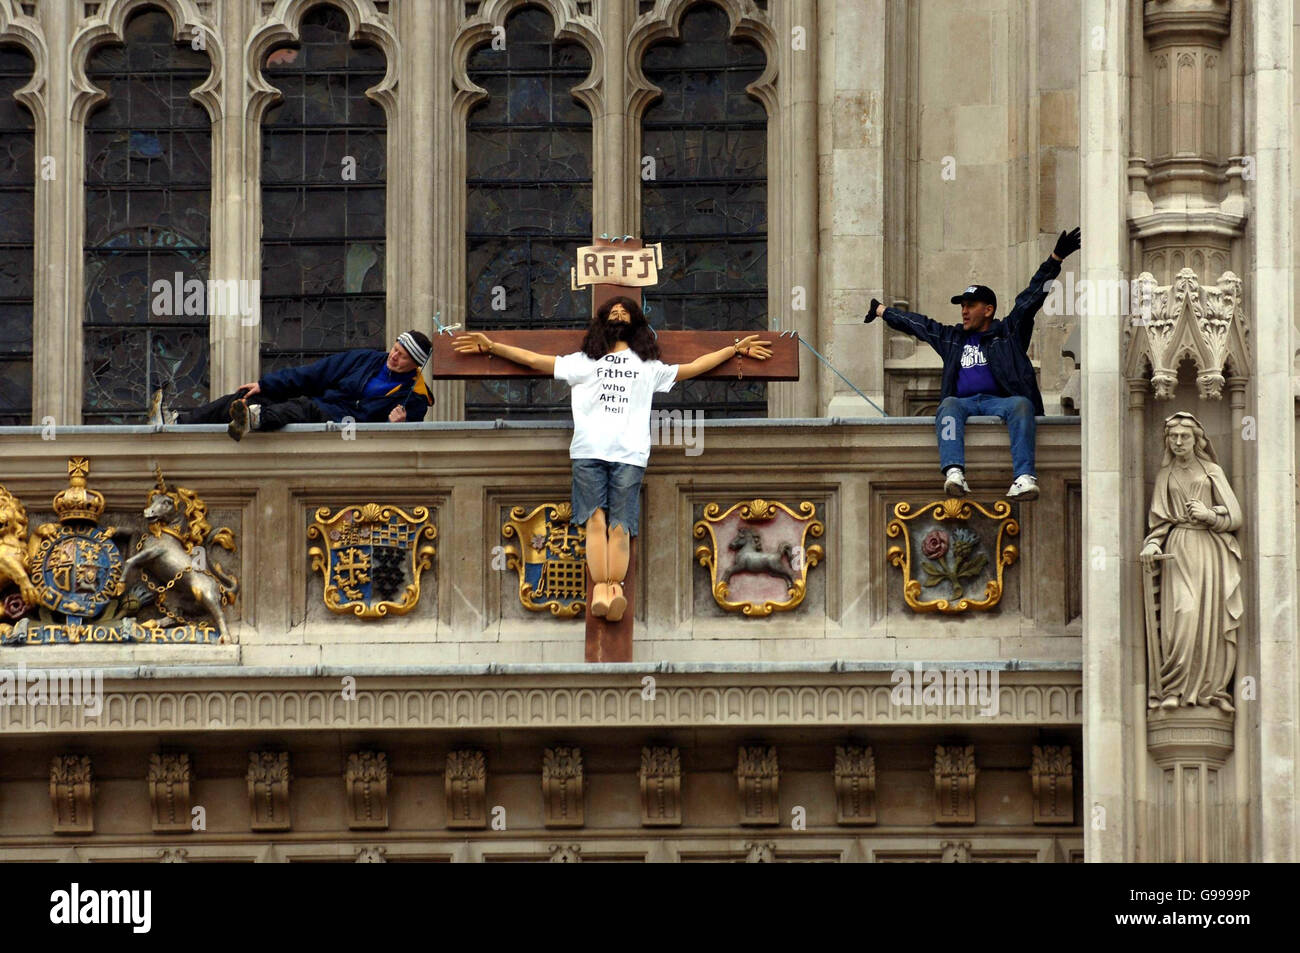 Real Fathers for Justice campaigners on a ledge of Westminster Abbey, in central London. Stock Photo